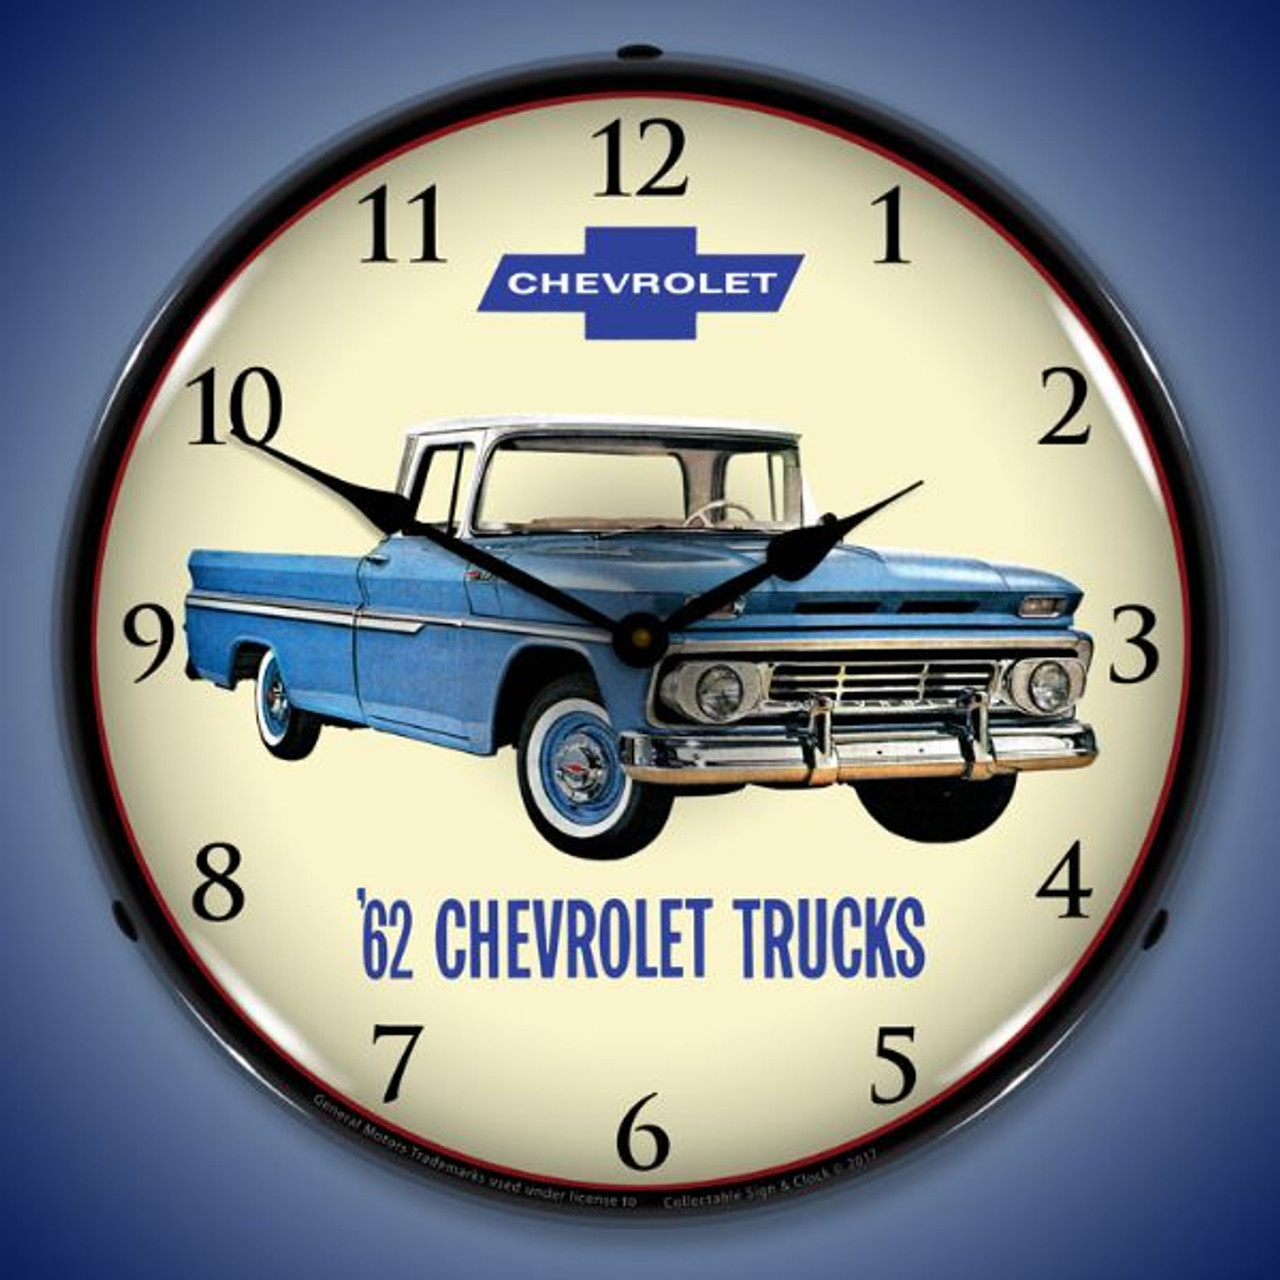 1962 Chevrolet Truck Lighted Wall Clock 14 x 14 Inches